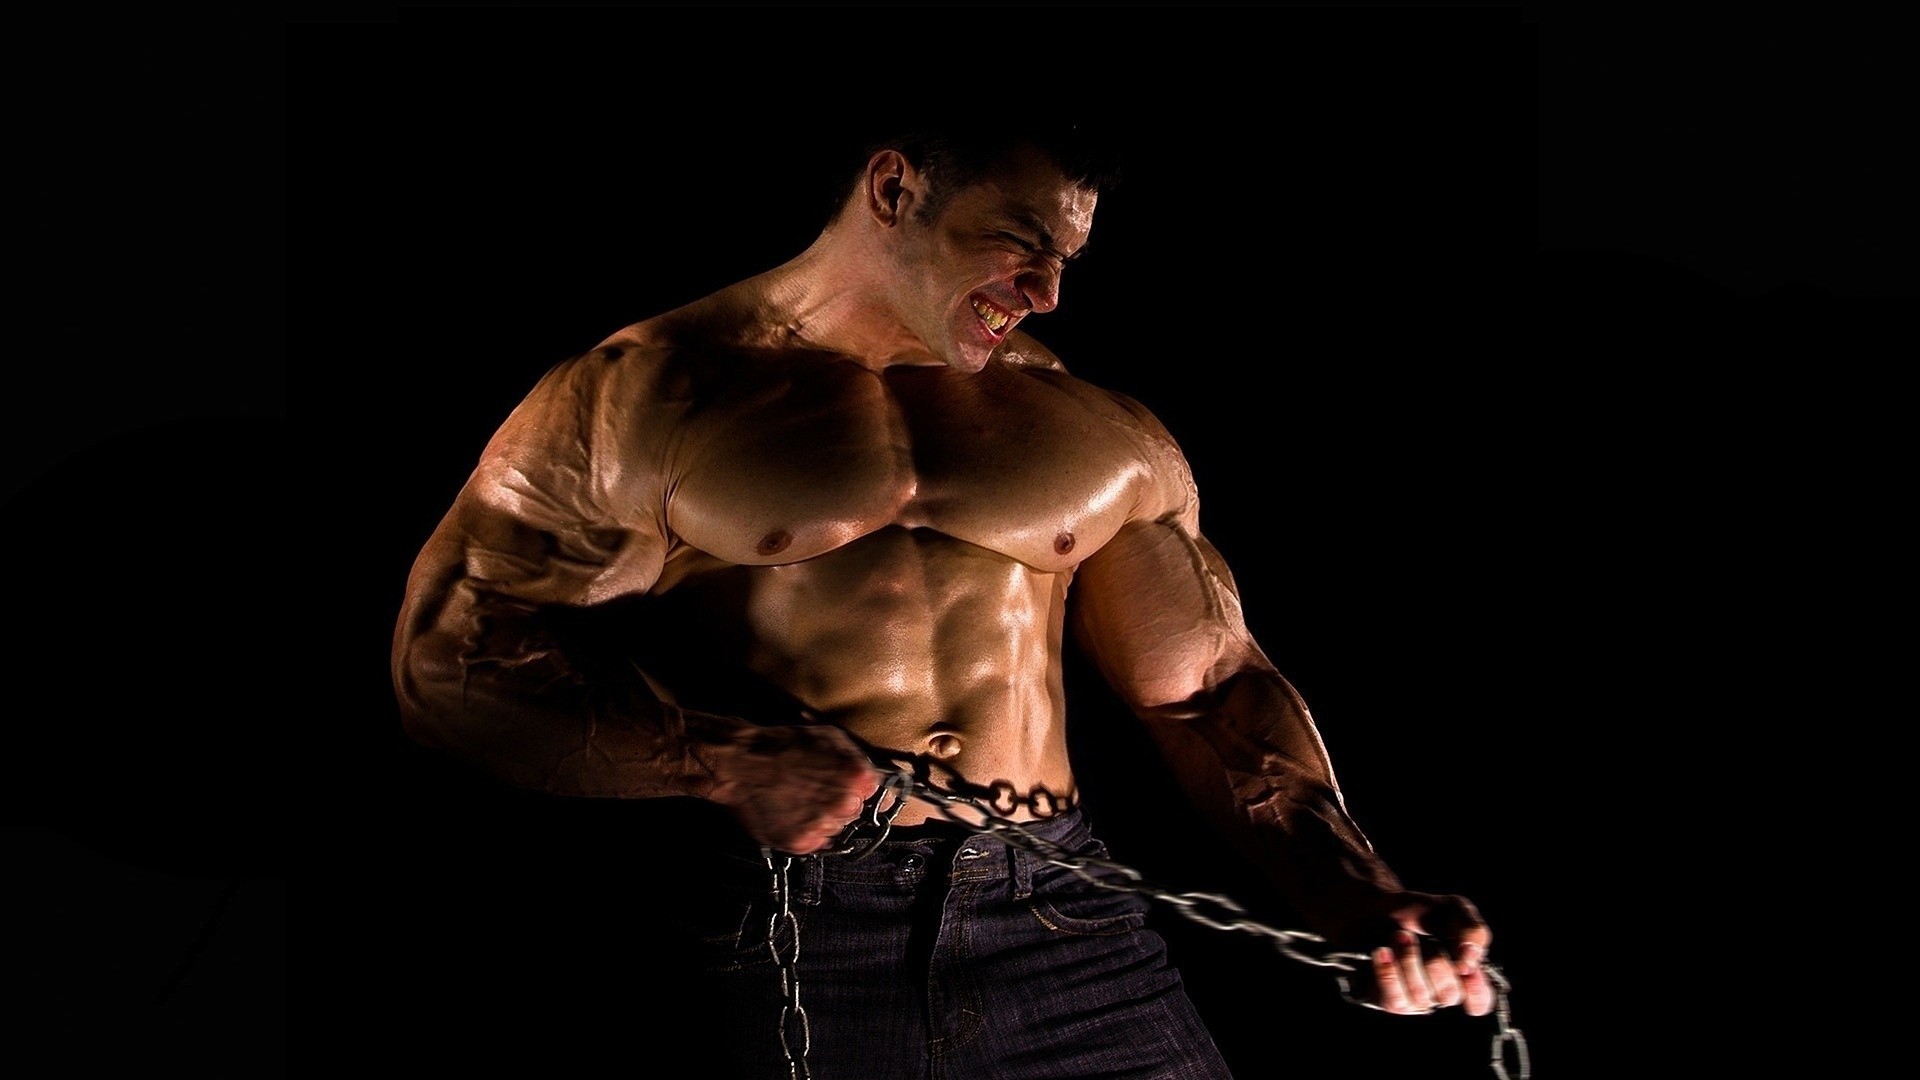 1920x1080 BODYBUILDER sports chain fitness muscle men males sexy handsome hunk  wallpaper |  | 32257 | WallpaperUP